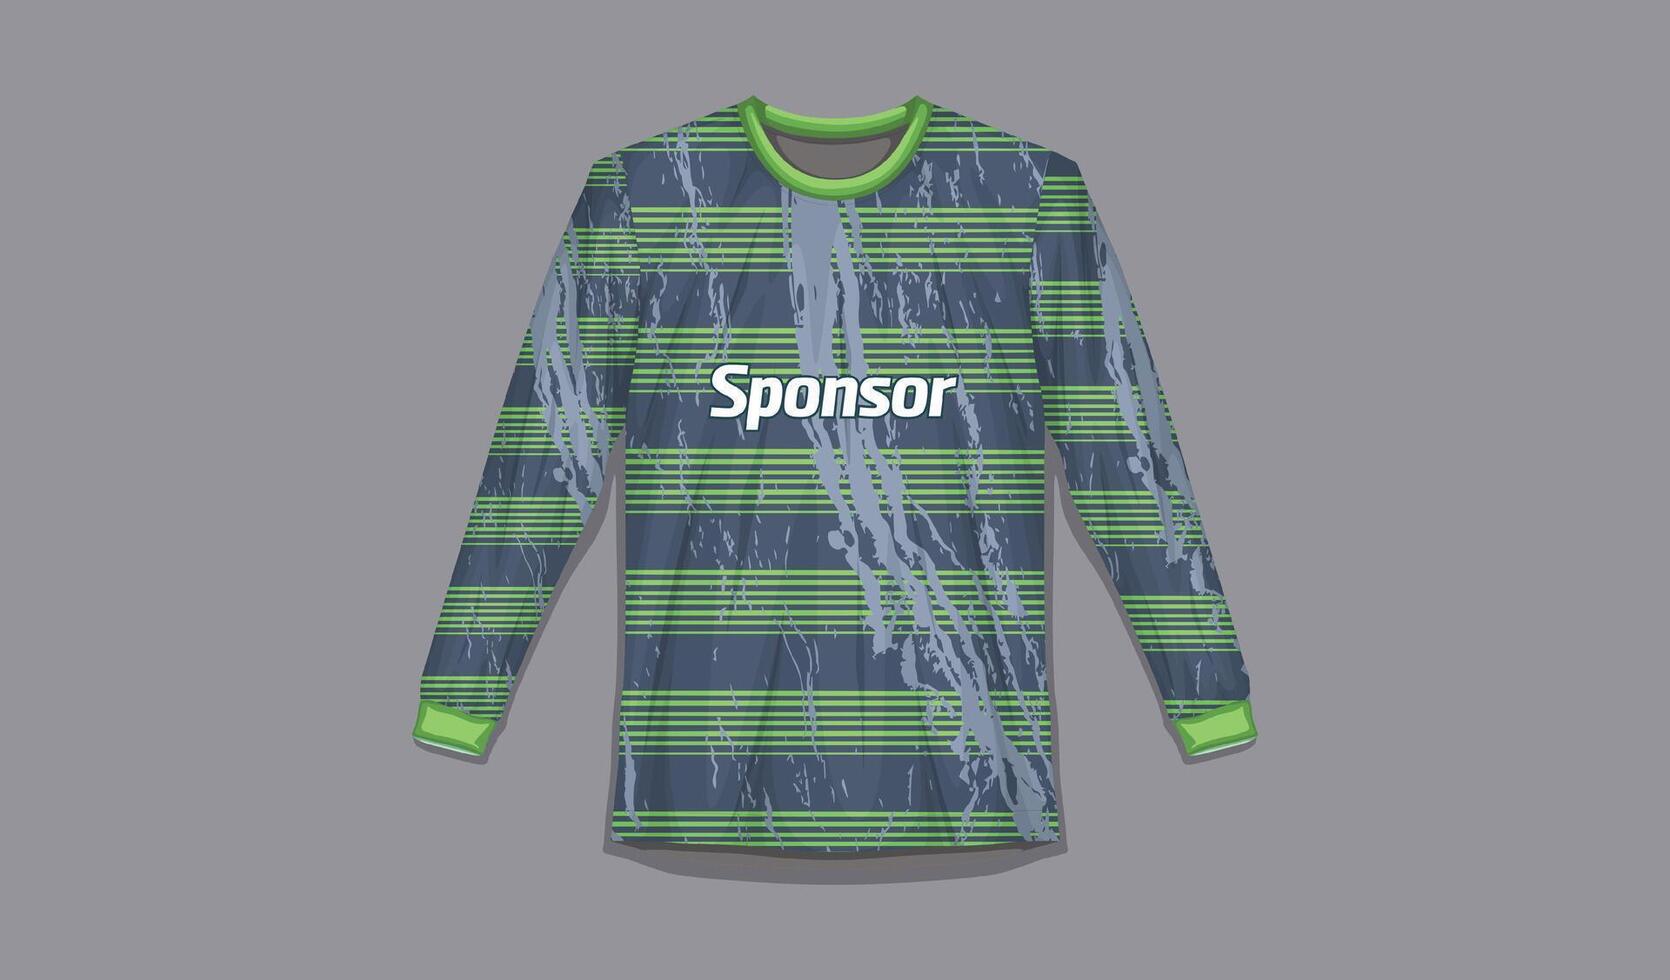 Sports shirt design ready to print Football shirt for sublimation vector